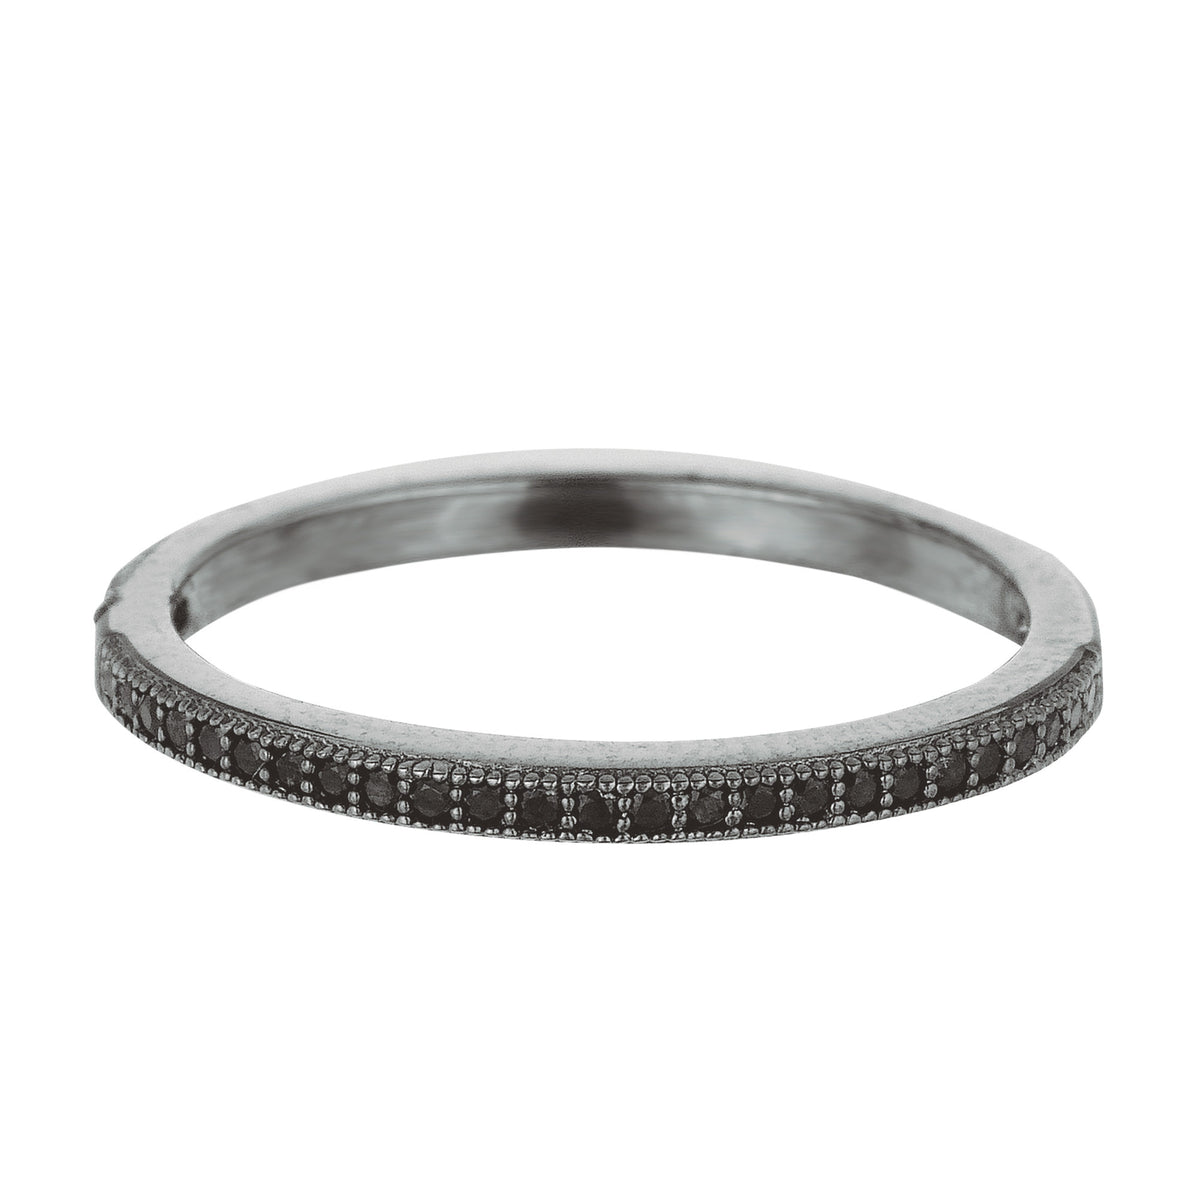 Sterling Silver Ruthenium Finish Milgrain Stackable Ring With Pave' Set Cz Stones - JewelryAffairs
 - 1